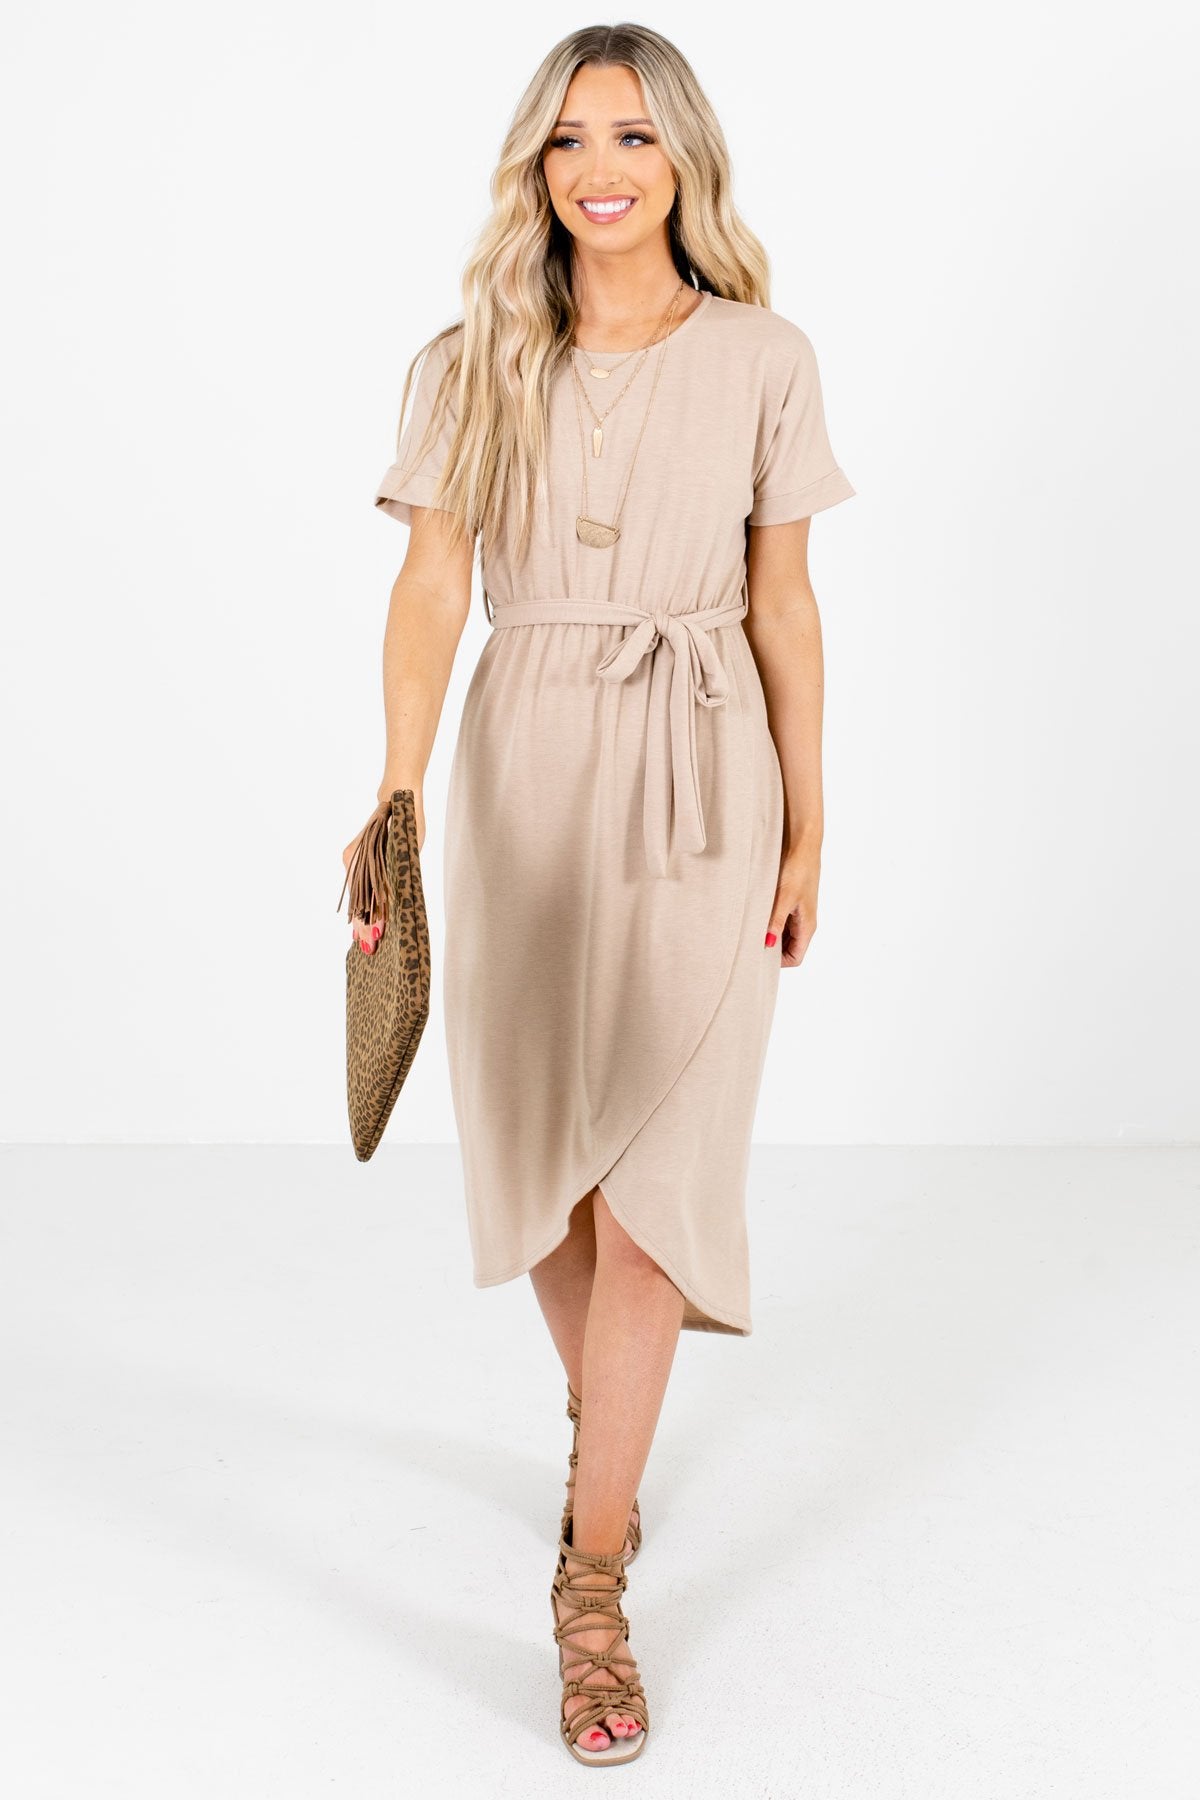 Women's Brown Cuffed Sleeved Boutique Knee-Length Dresses